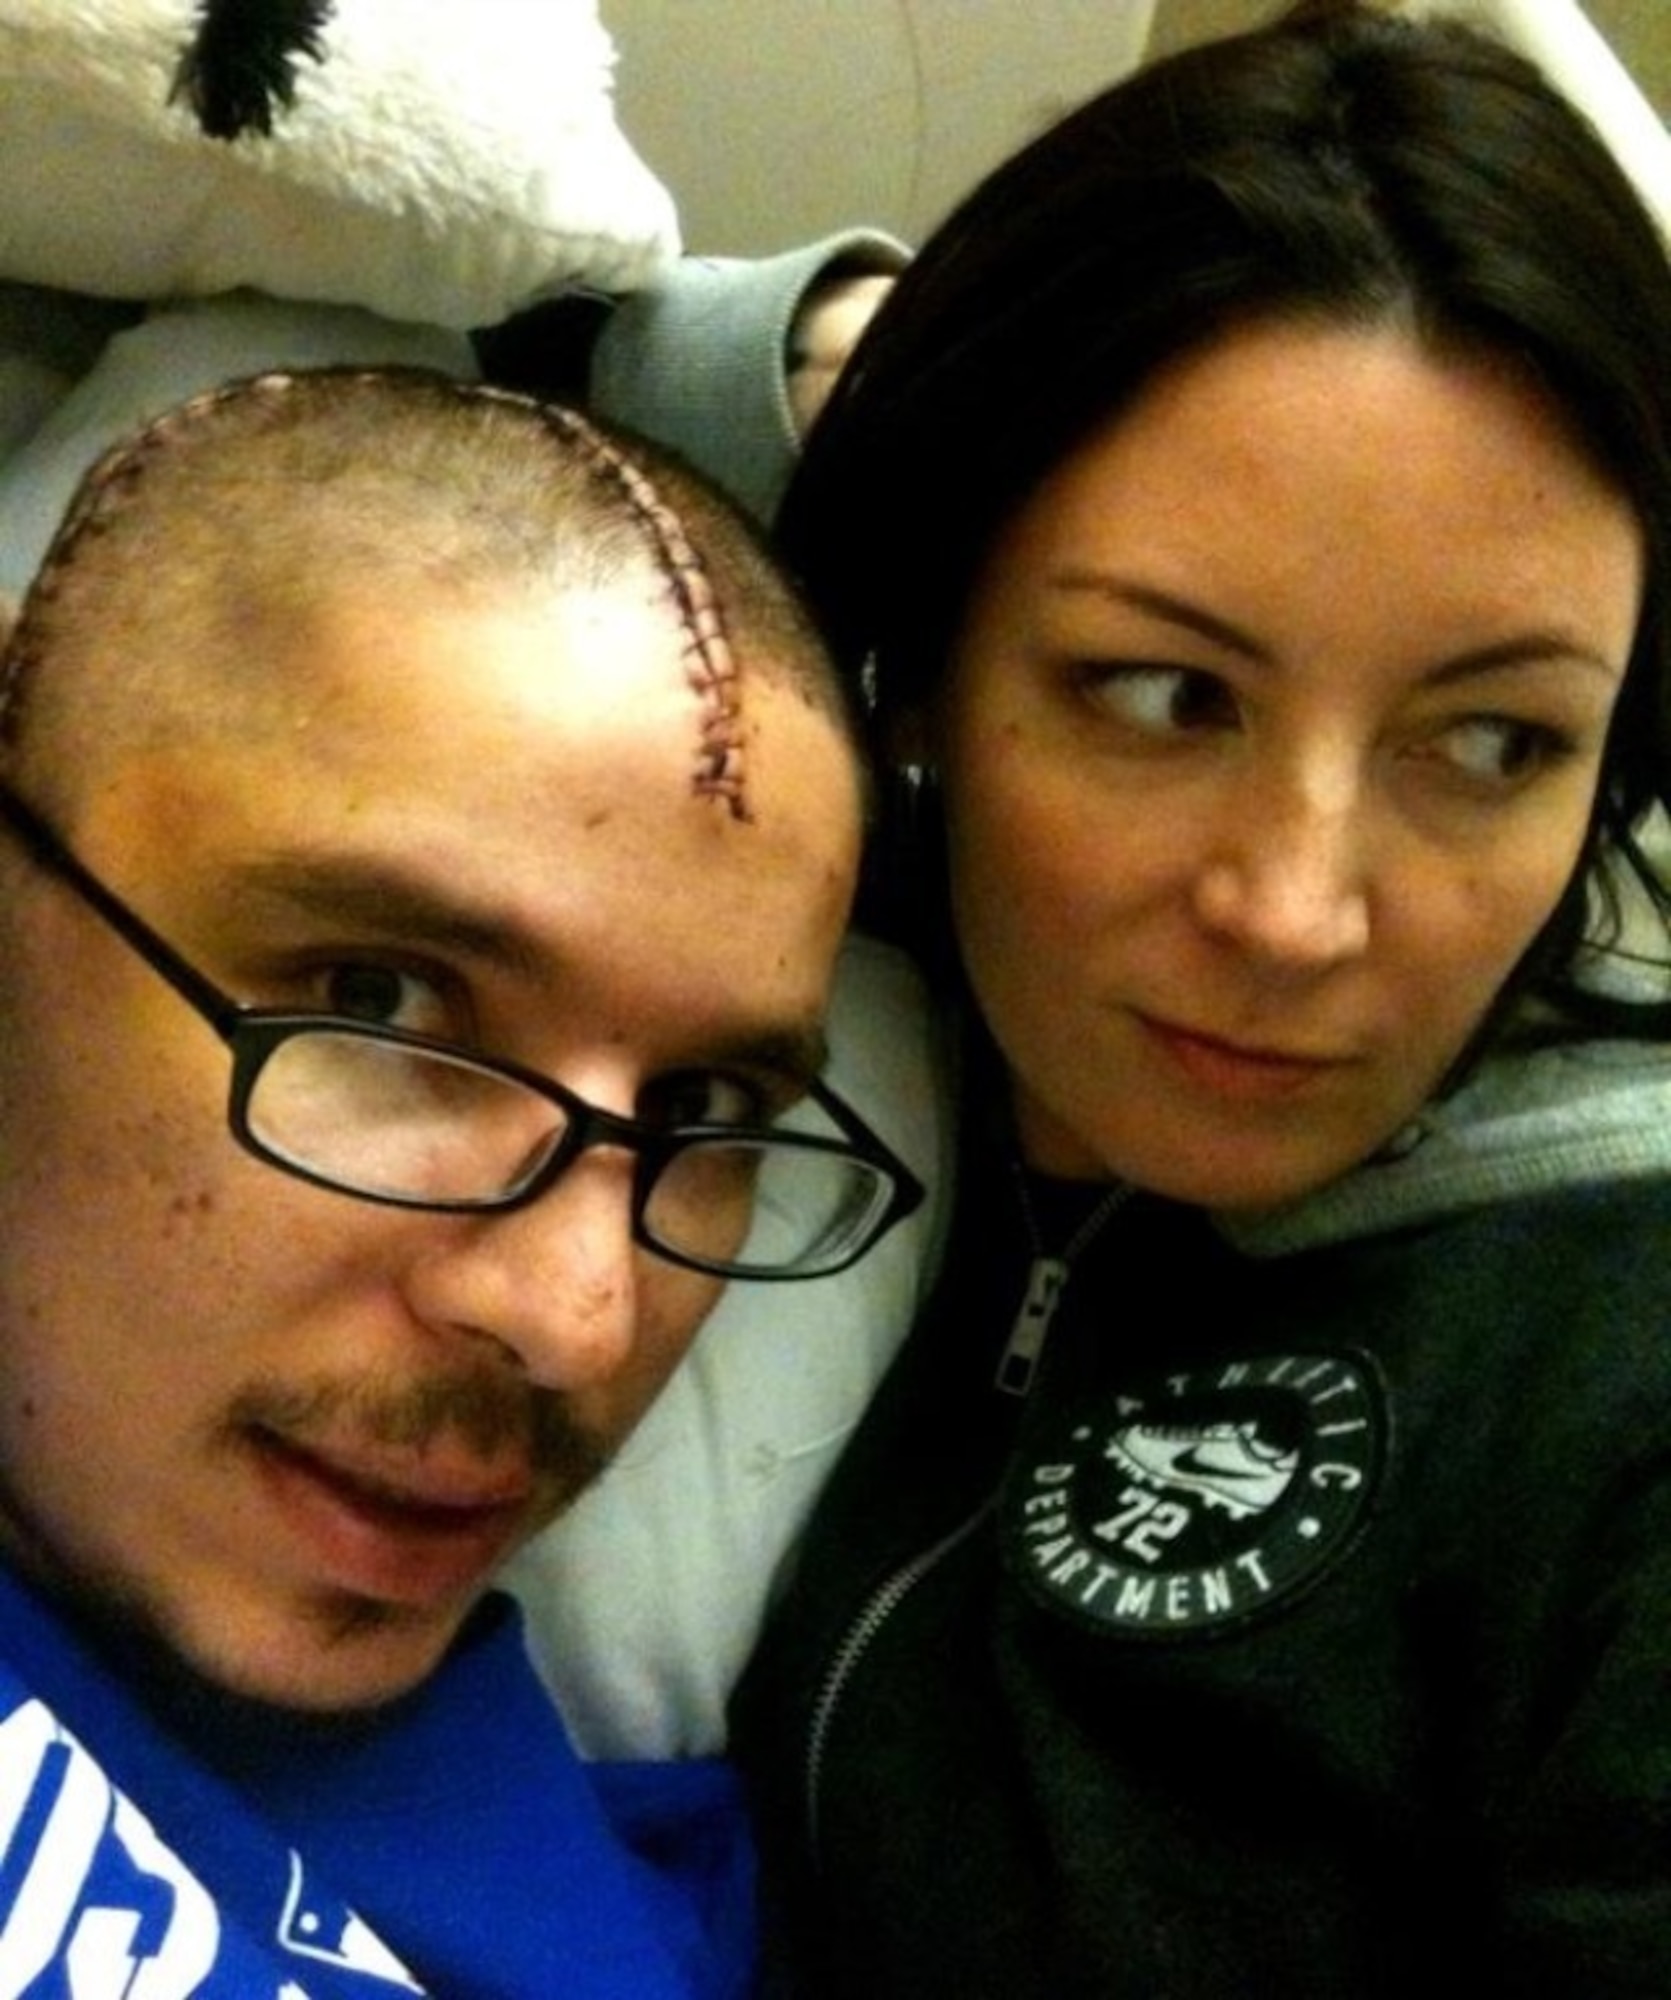 Then Master Sgt. Phillip Sisneros takes a selfie with his wife, Master Sgt. Angela Sisneros, after waking up from a 30-day coma following a motorcycle accident in Las Vegas on Aug. 13, 2011. Angela stayed by Phillip’s side throughout the coma and the months of grueling rehab he would have ahead. (Courtesy photo/retired Master Sgt. Phillip Sisneros)